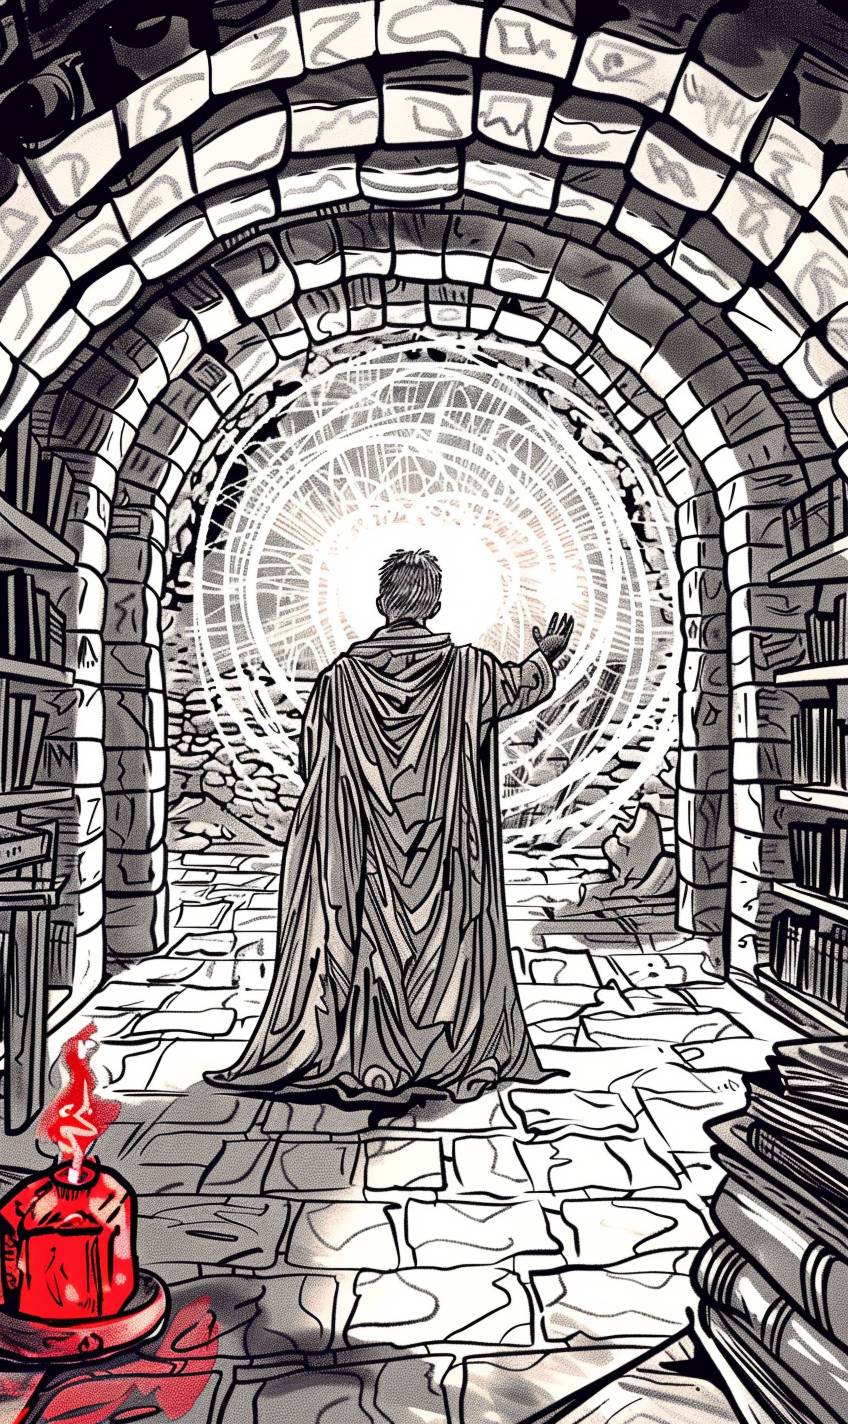 A mysterious sorcerer casting a powerful spell in a dark, ancient library filled with arcane books and mystical artifacts